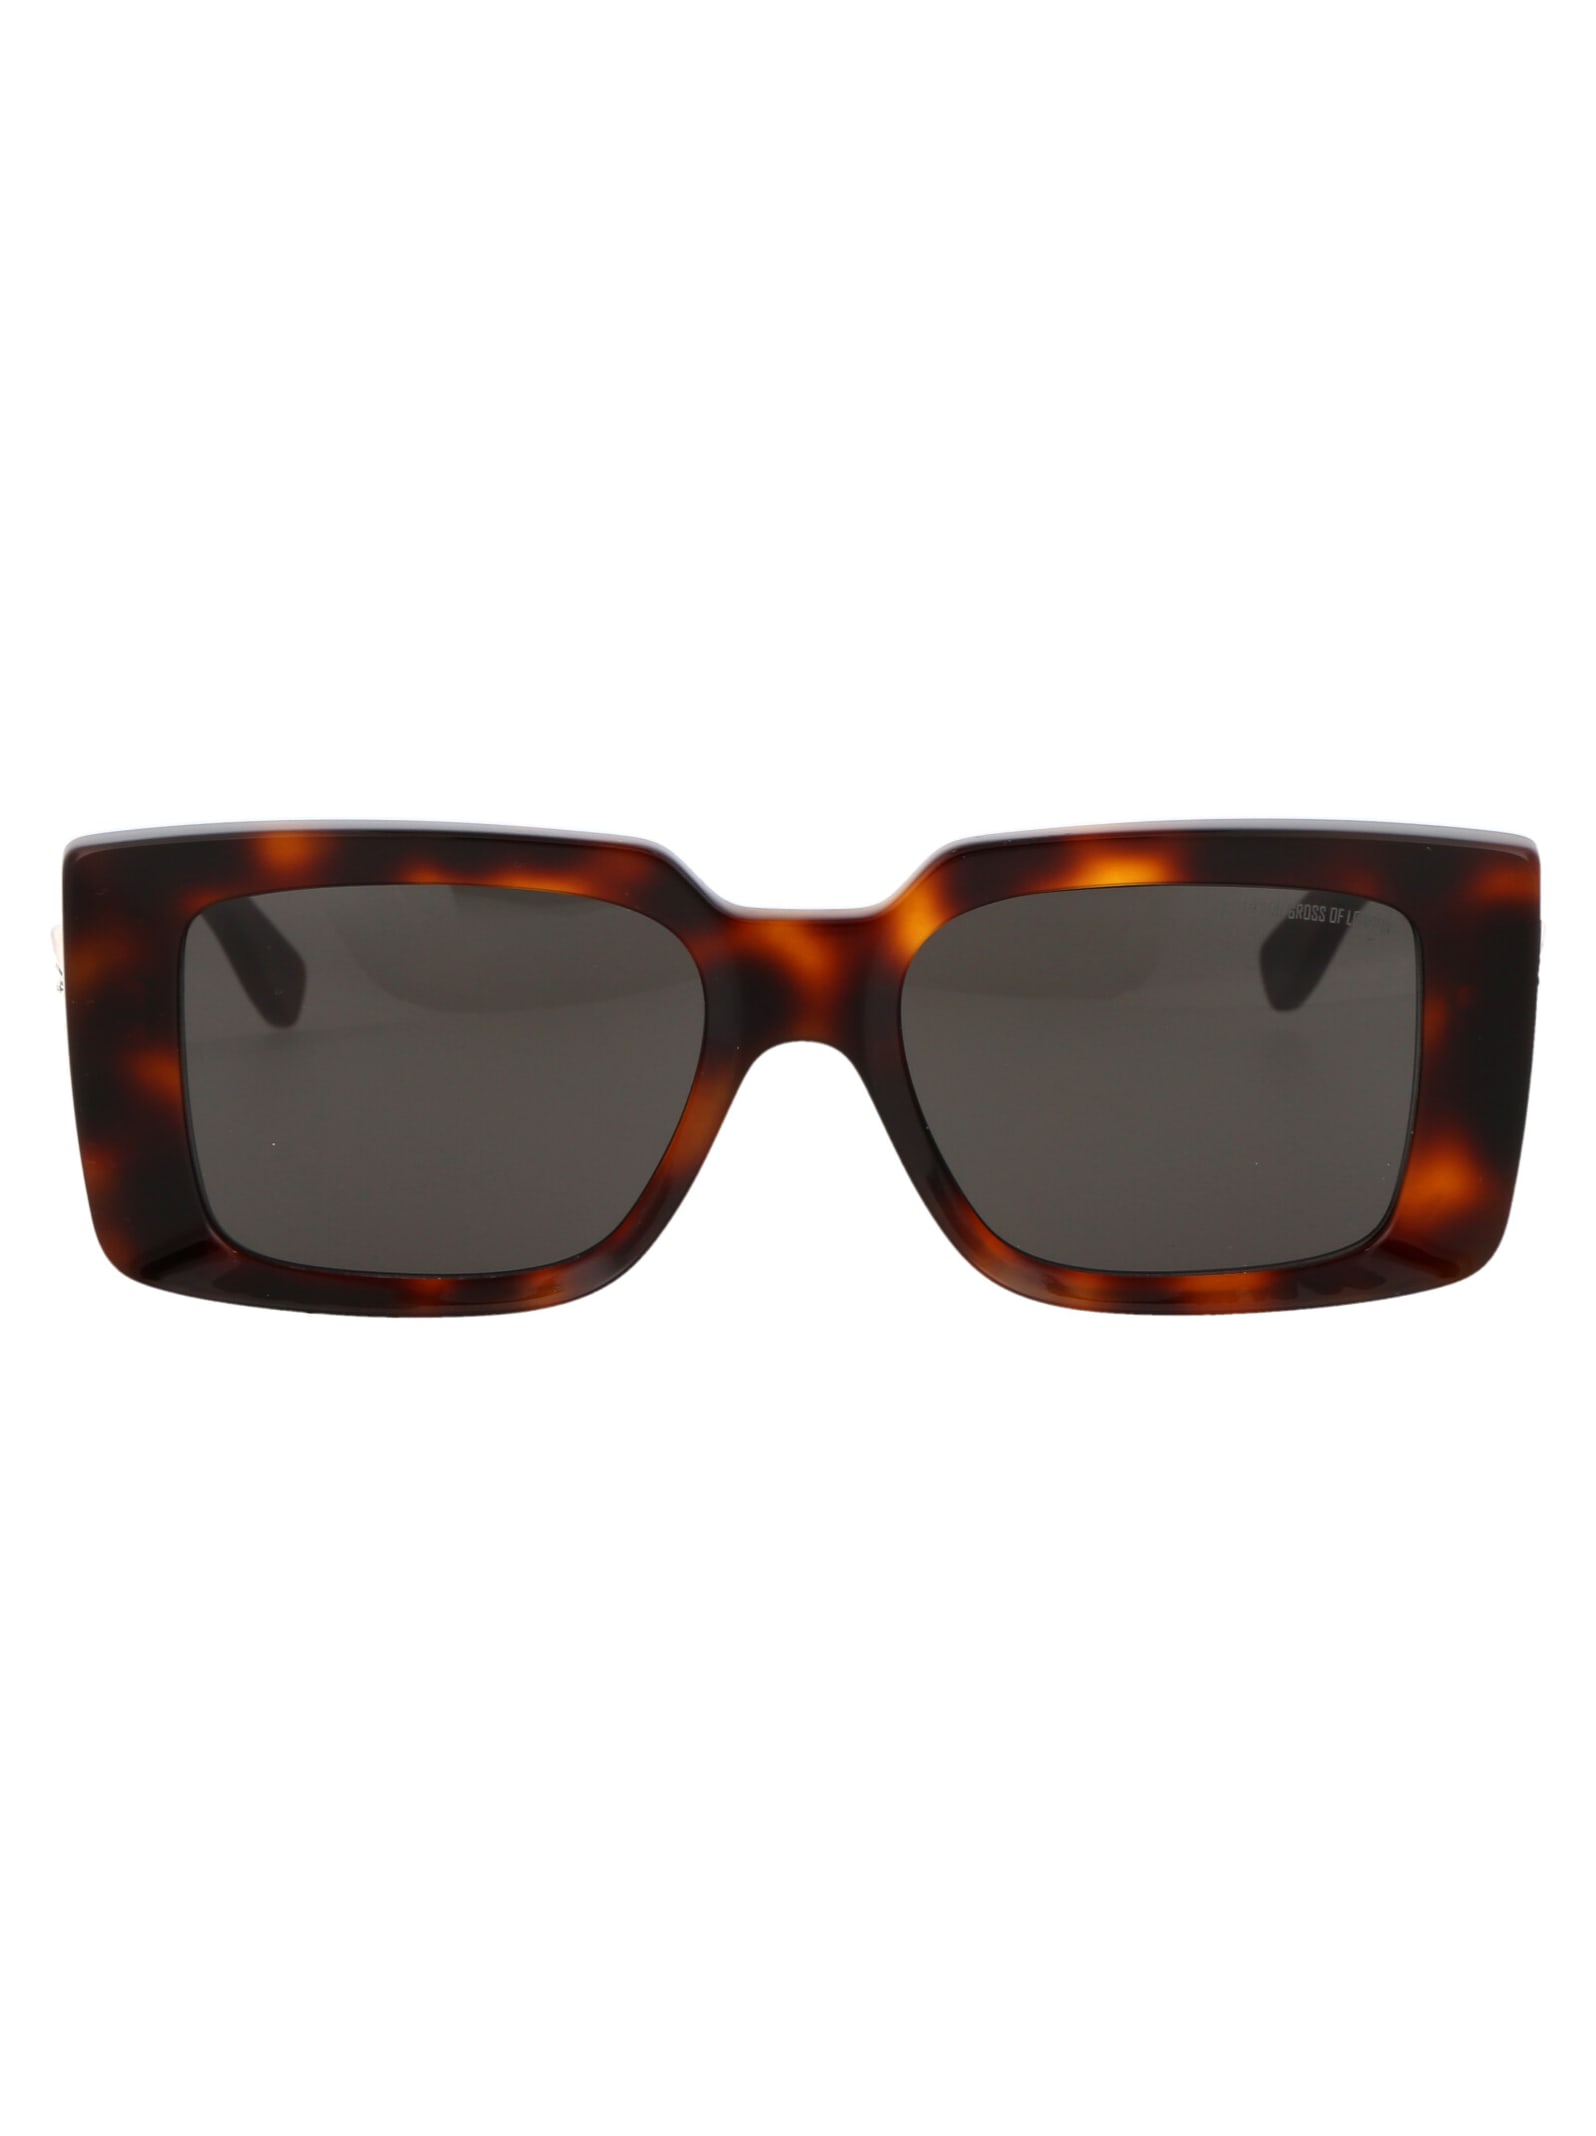 Cutler and Gross The Great Frog - 001 Sunglasses